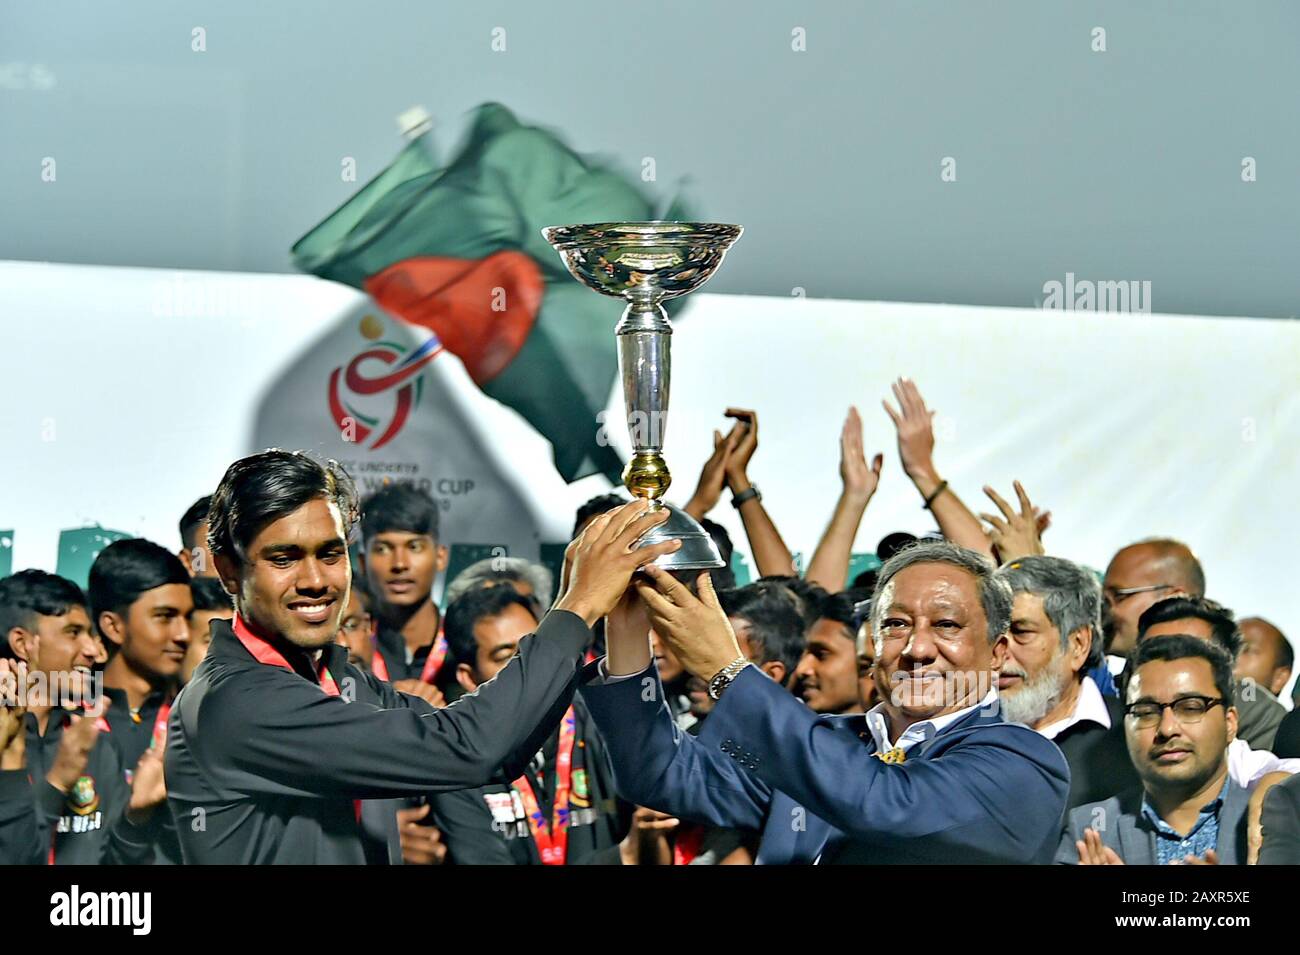 Dhaka Bangladesh 12th Feb Bangladesh S Icc Under 19 World Cup Winning Squad And Officials Pose For Pictures With Trophy Upon Arrival In Dhaka Bangladesh On Feb 12 Bangladesh Clinched Its Maiden